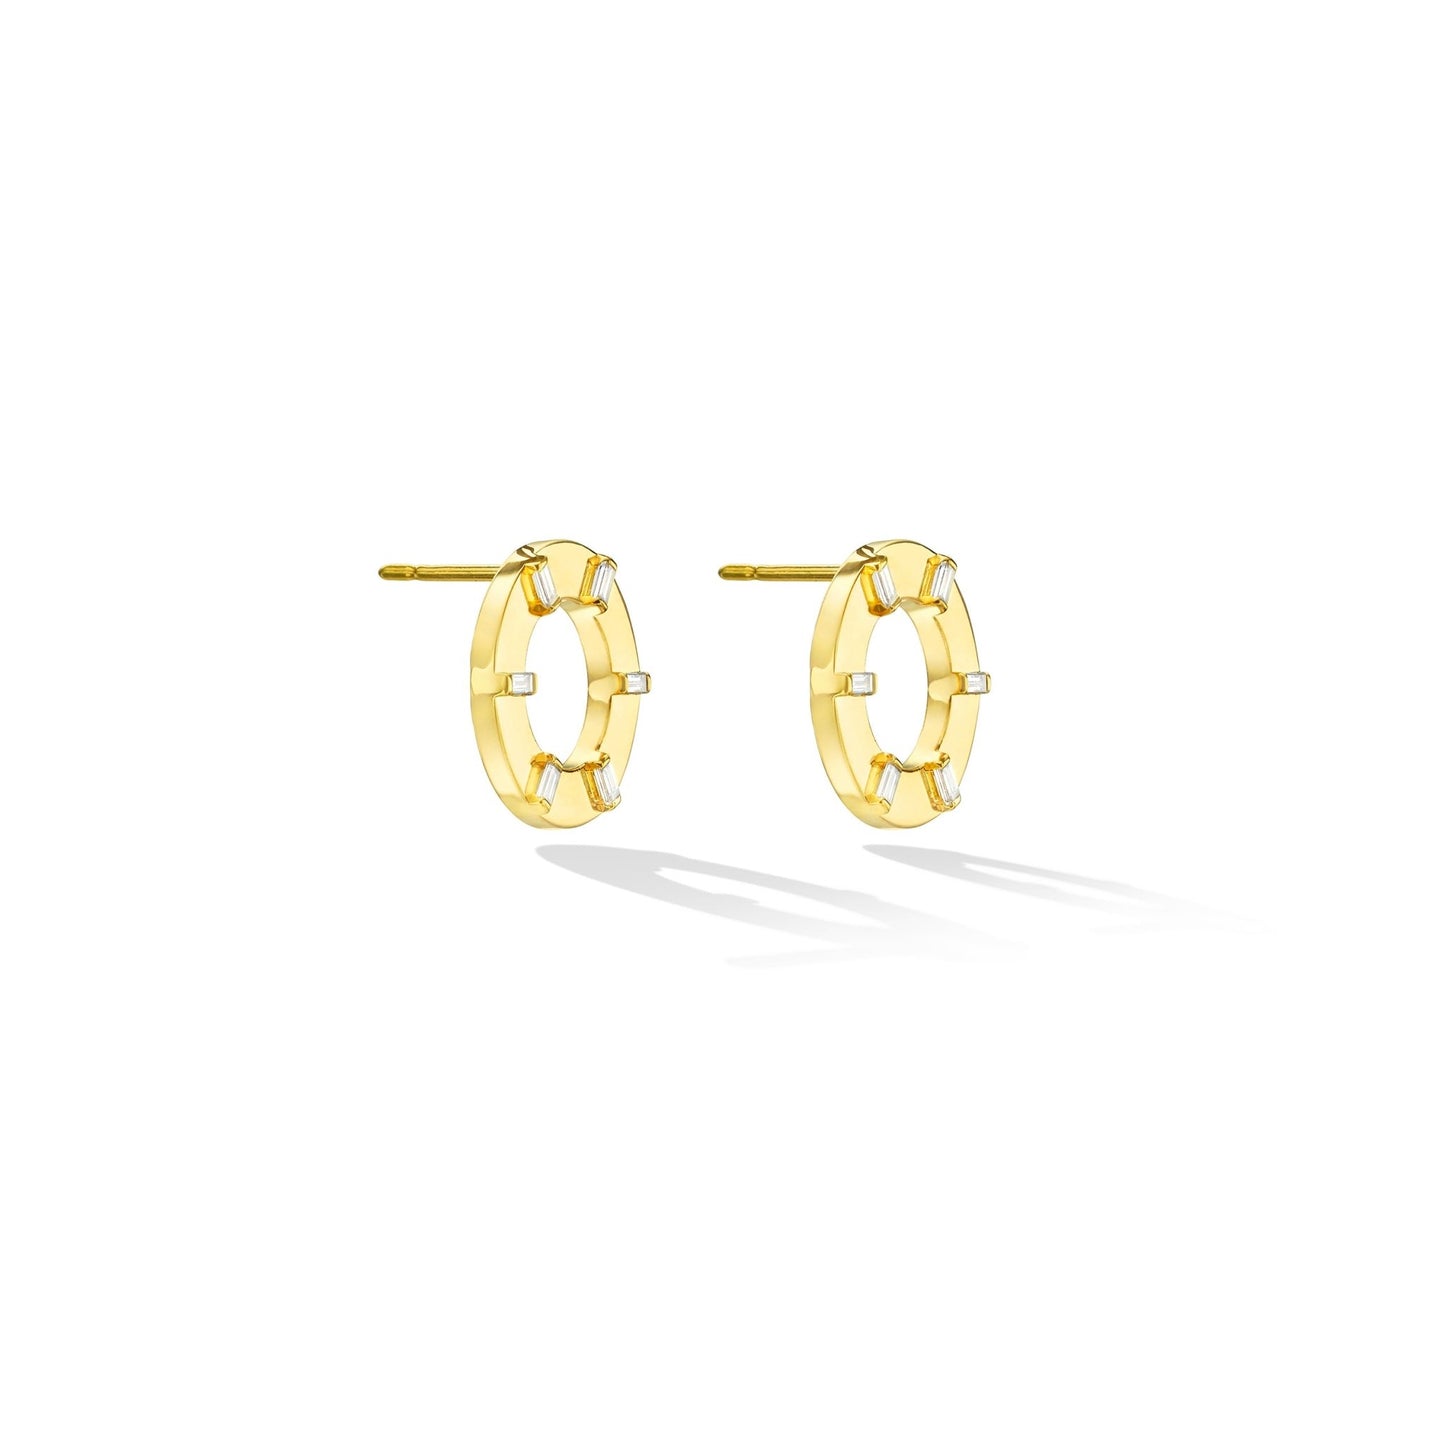 Yellow Gold Prime Unity Stud Earrings with White Diamonds - Cadar